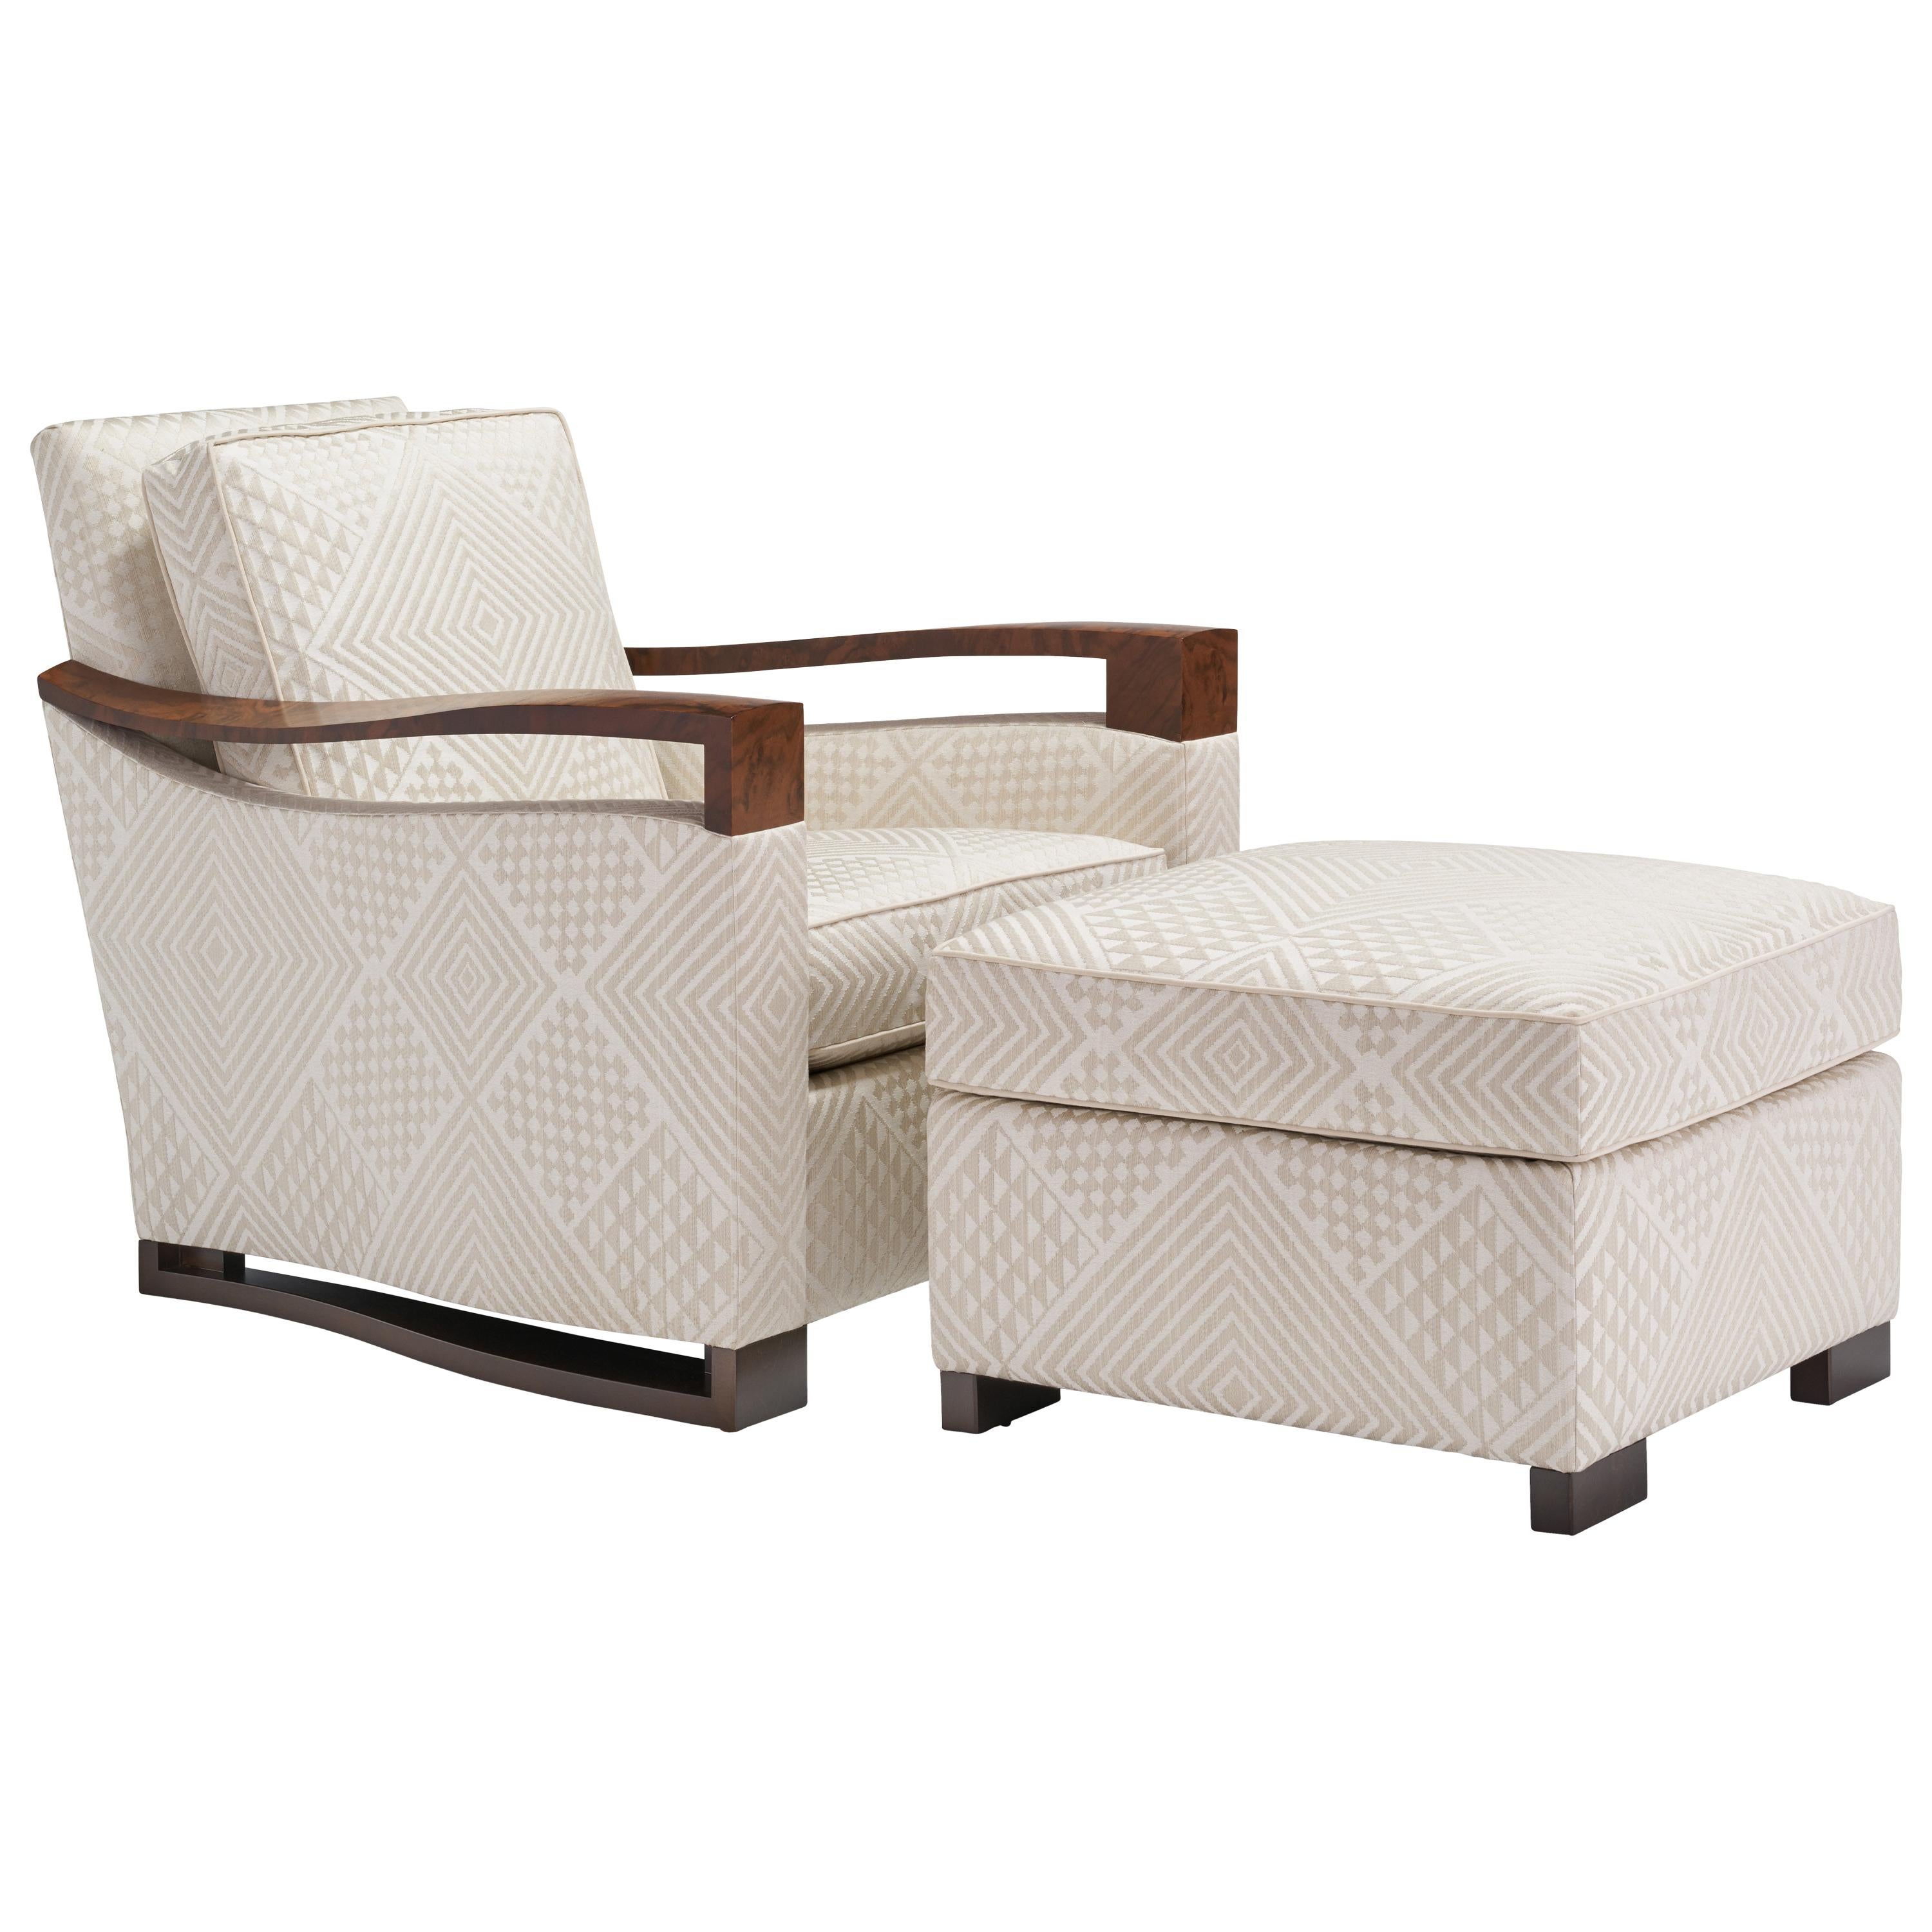 Donghia Woodbridge Club Chair and Ottoman in Cream Upholstery, Geometric Pattern For Sale